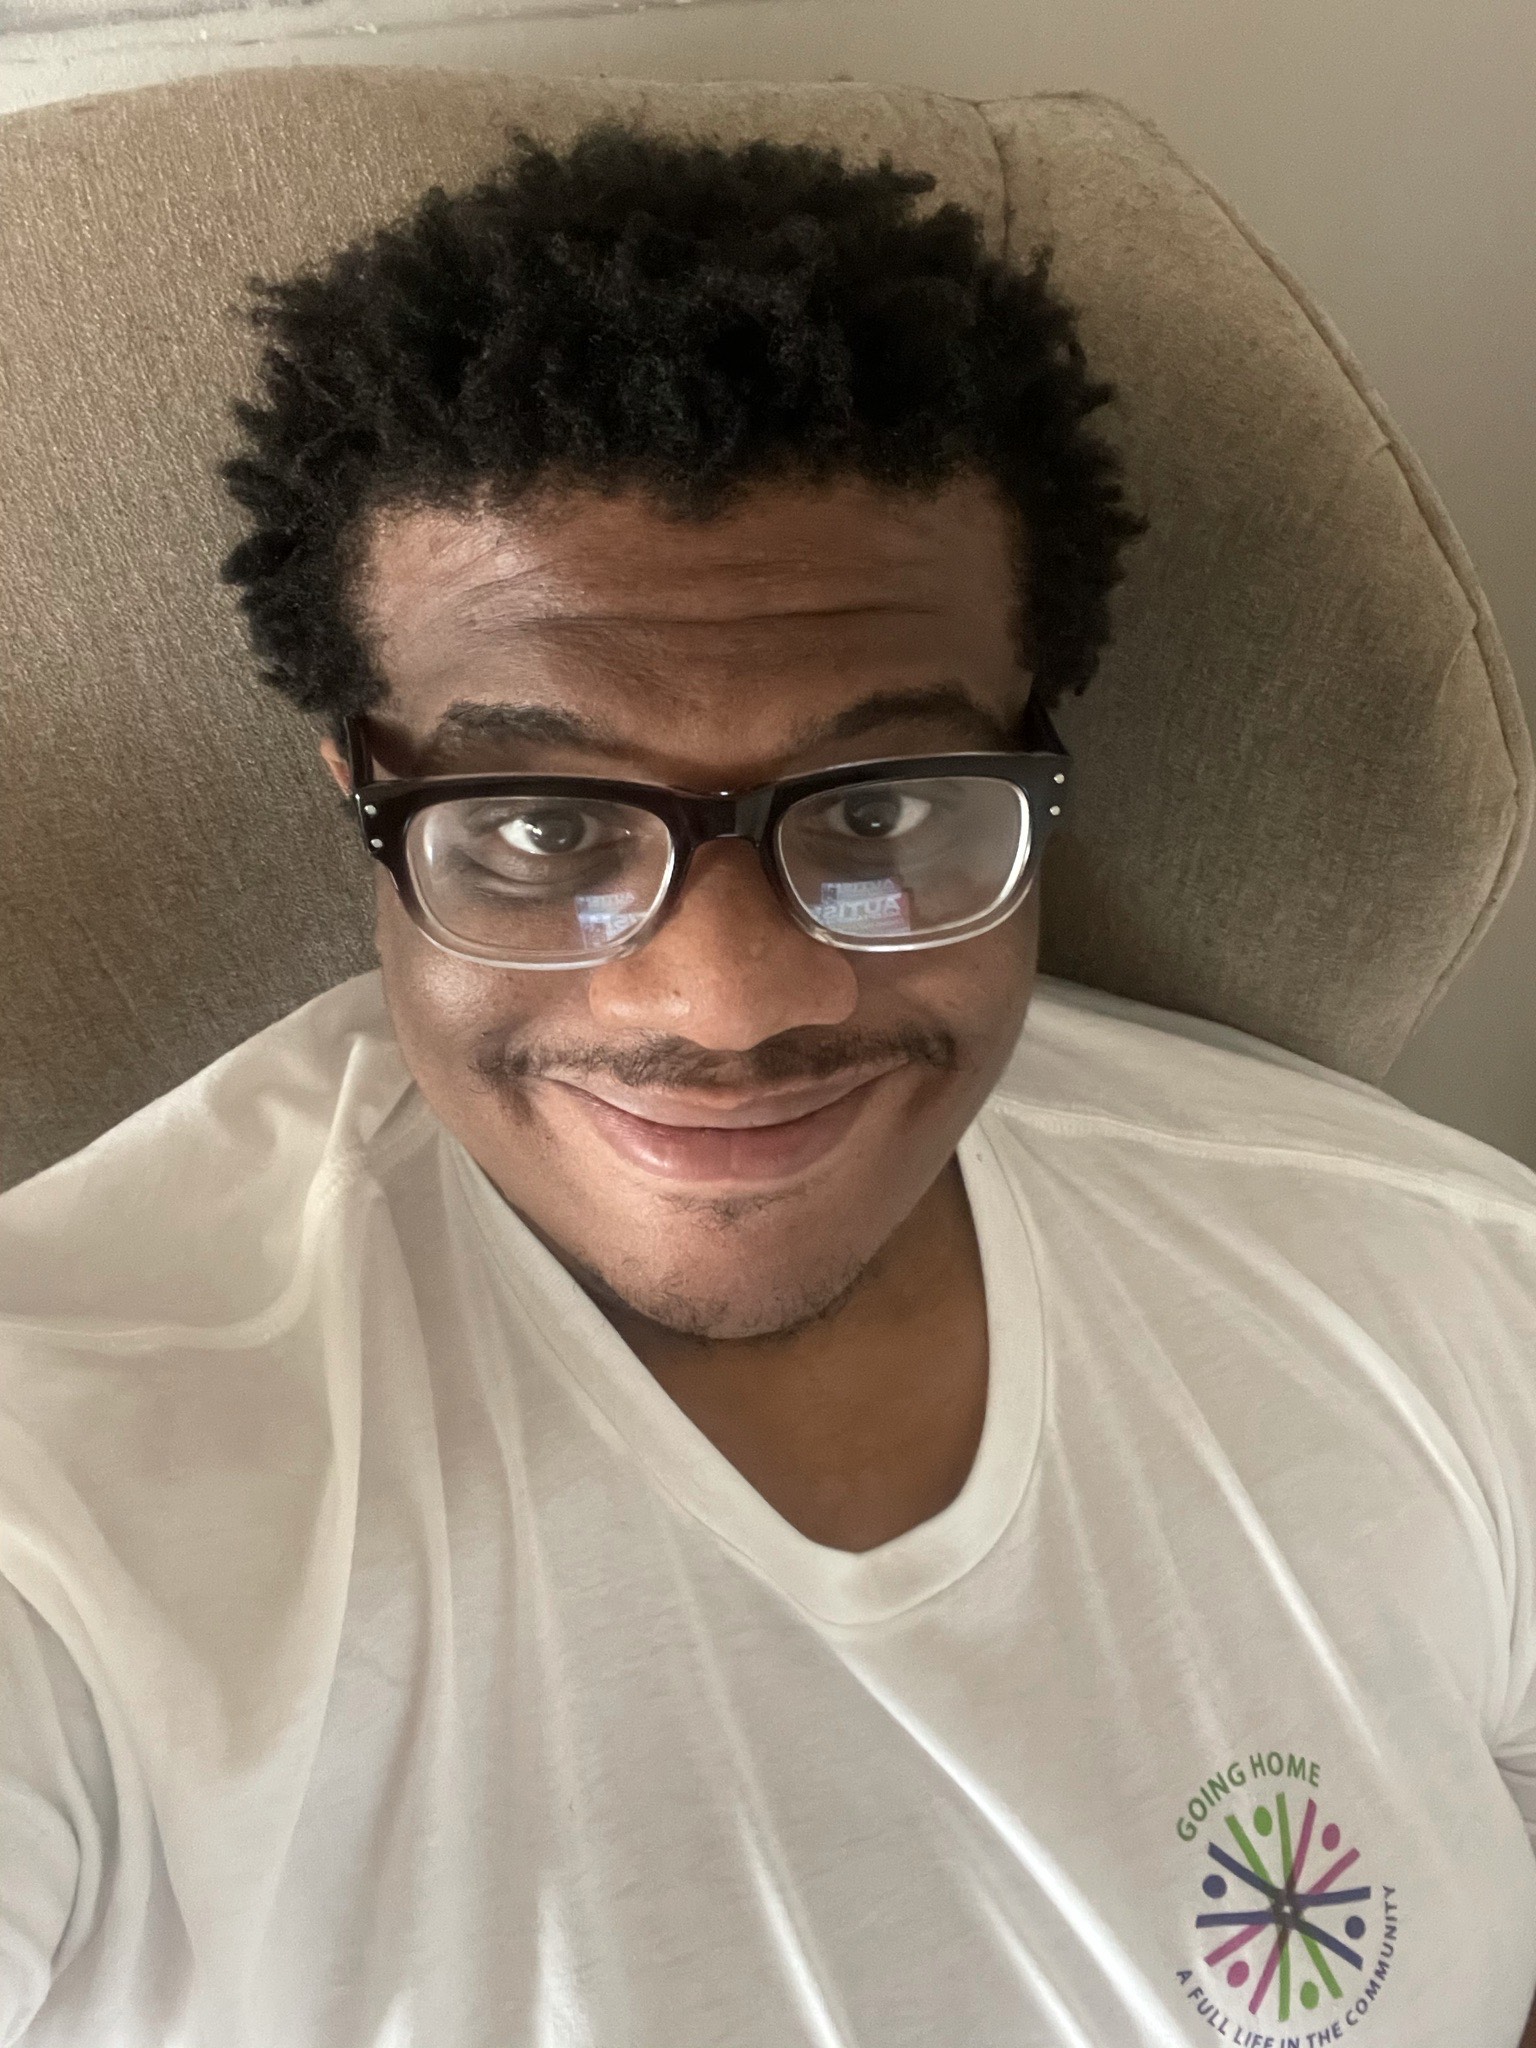 Image of Timotheus, a Black man with glasses wearing a tshirt with a logo that says Going Home, A Full Life in the Community